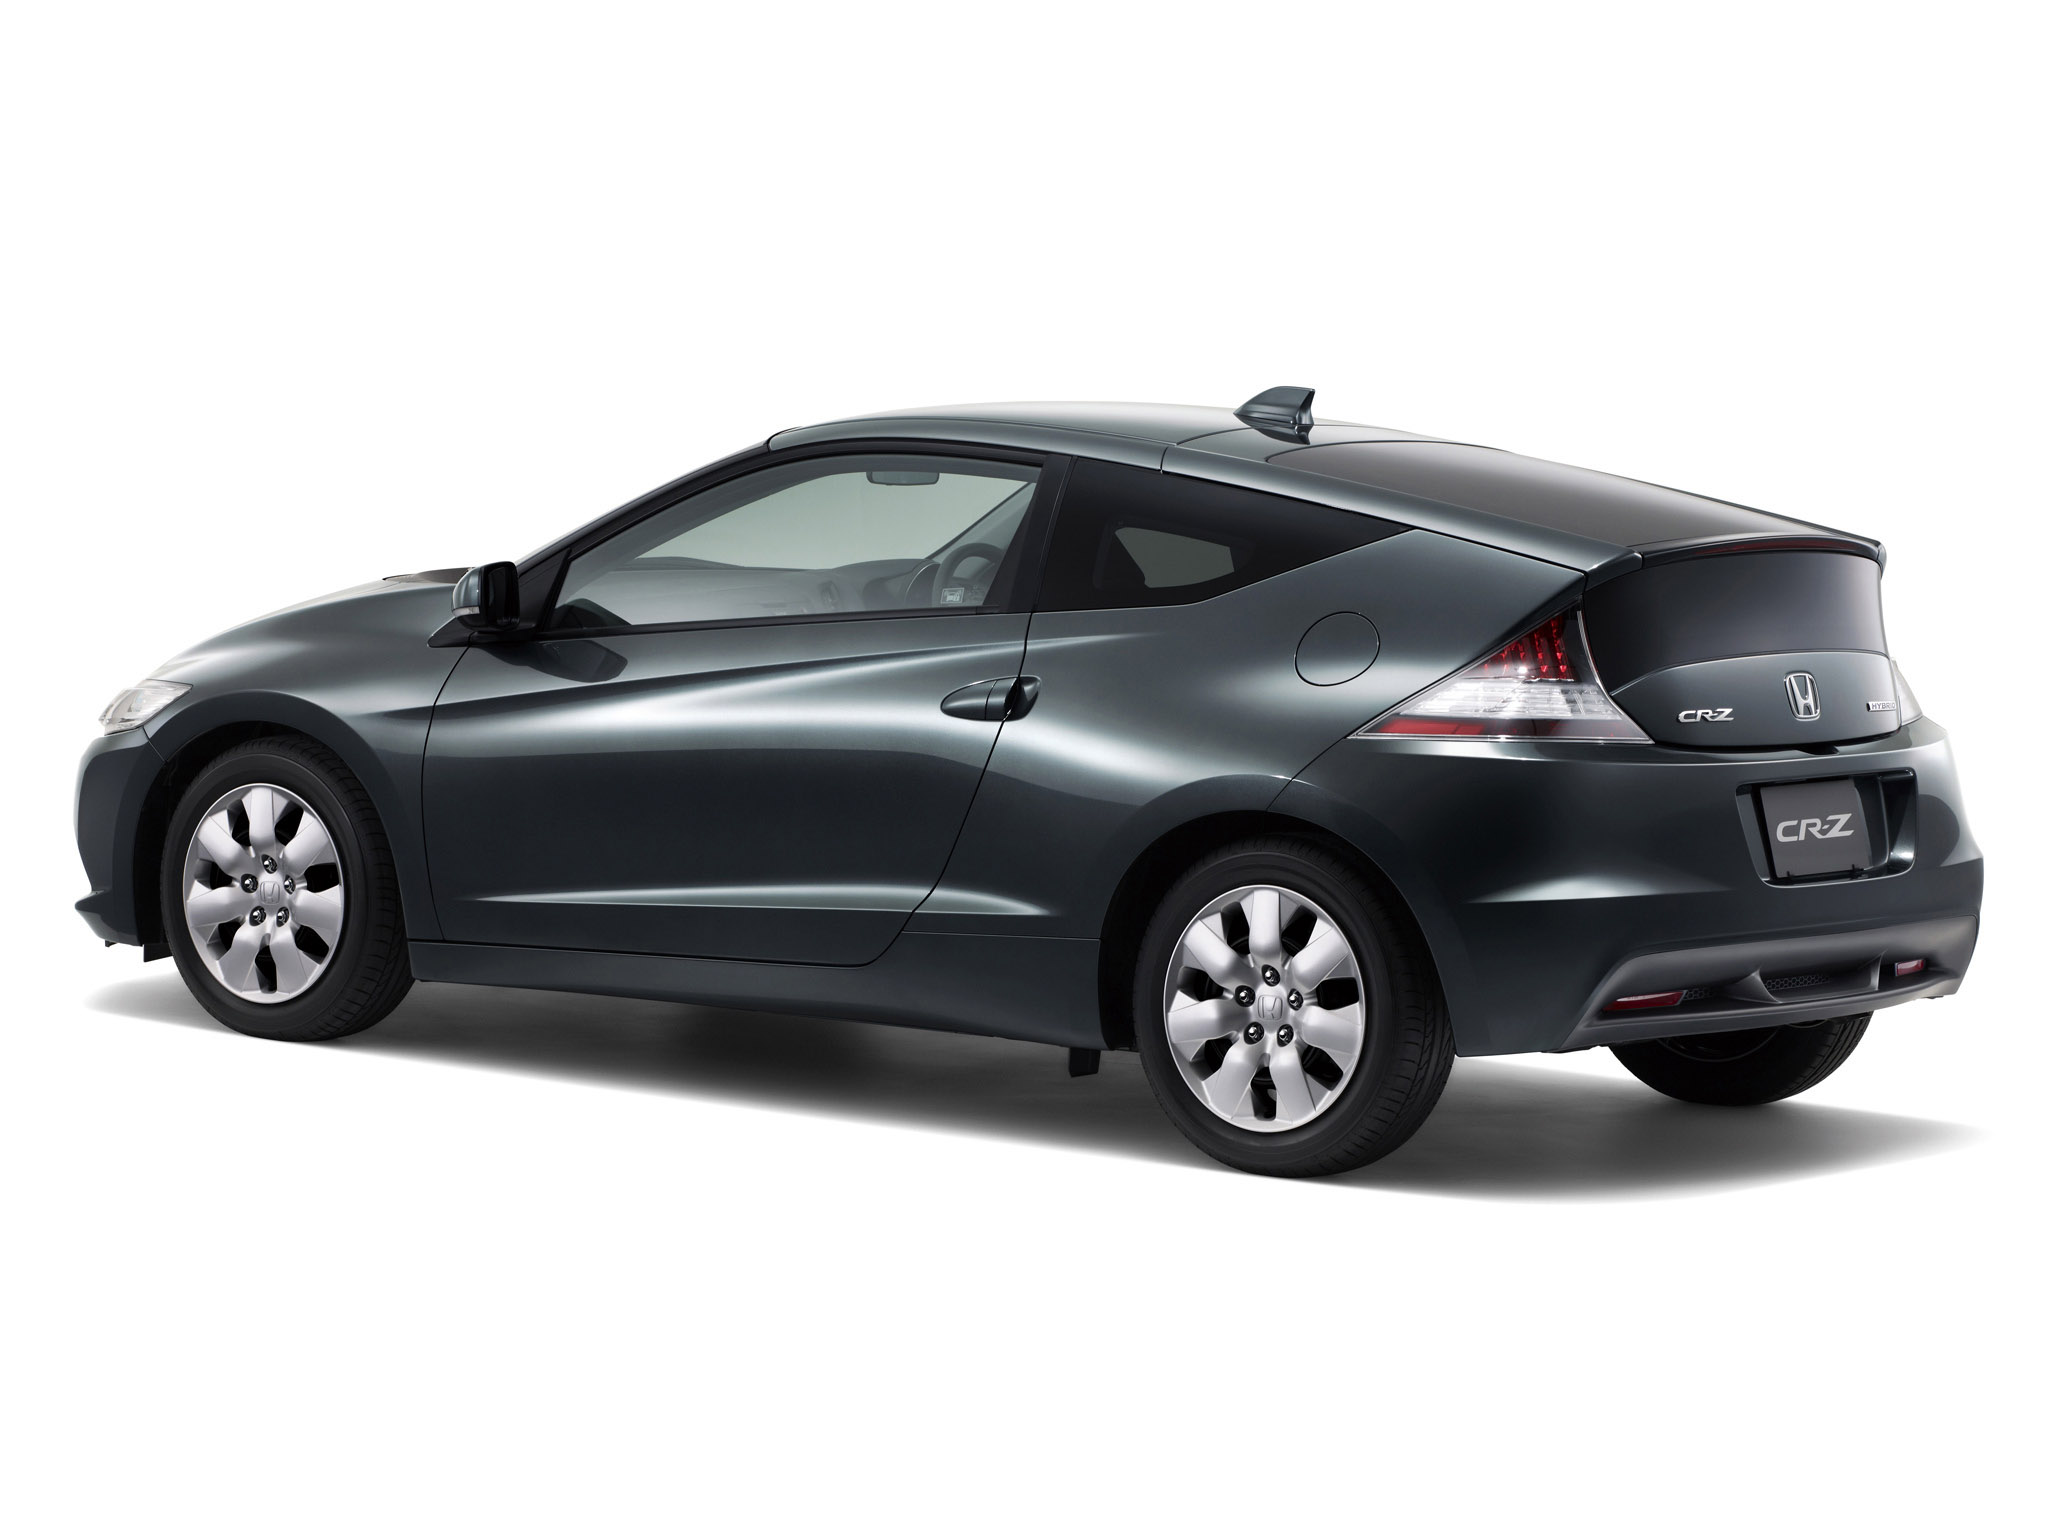 Car in pictures - car photo gallery " Honda cr-z japan 2010 Photo 09.